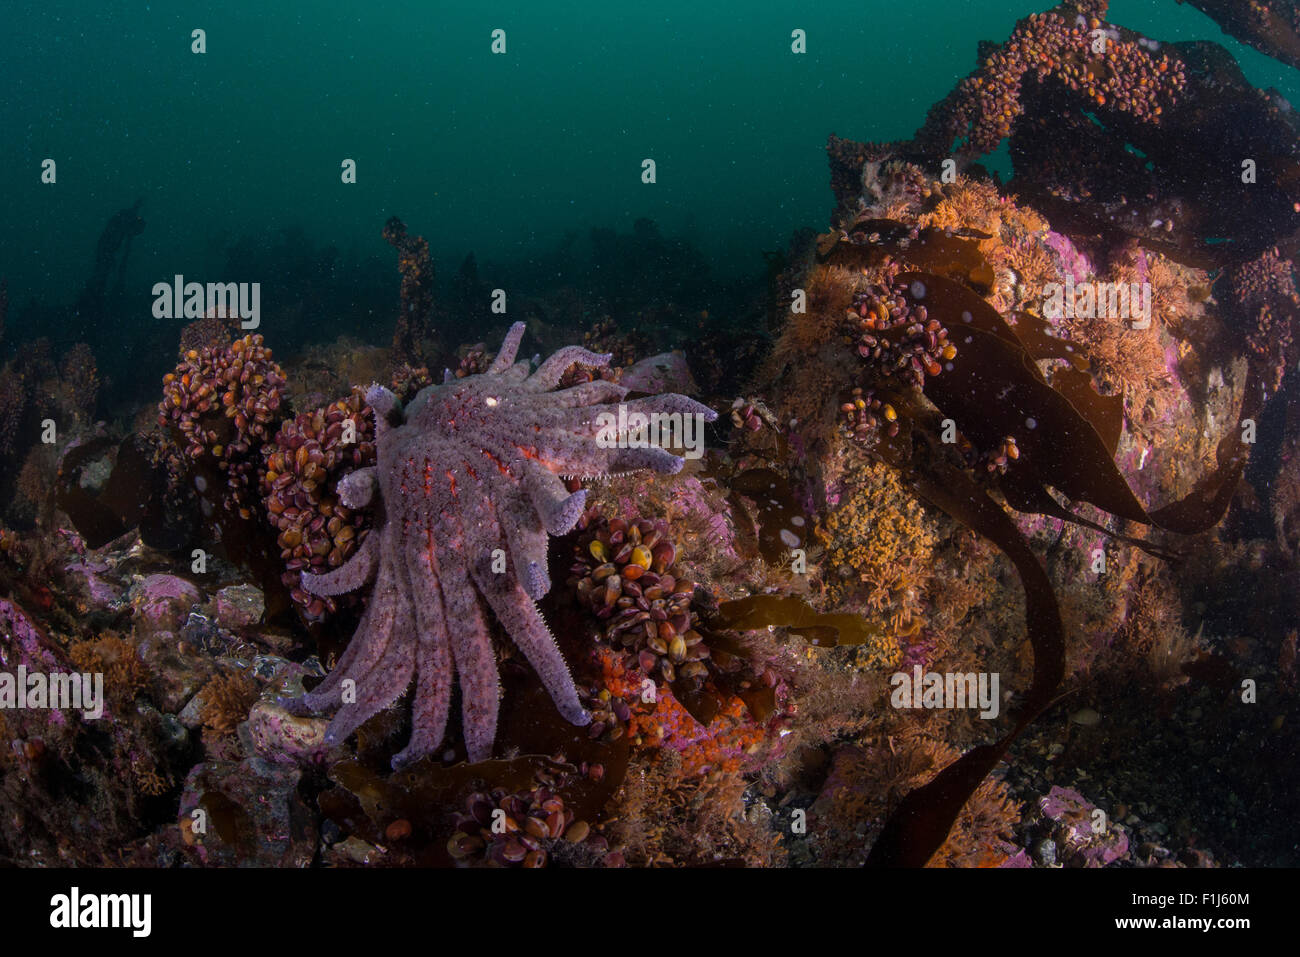 A sunflower star Pycnopodia helianthoides on the bottom photographed in Alaska Stock Photo